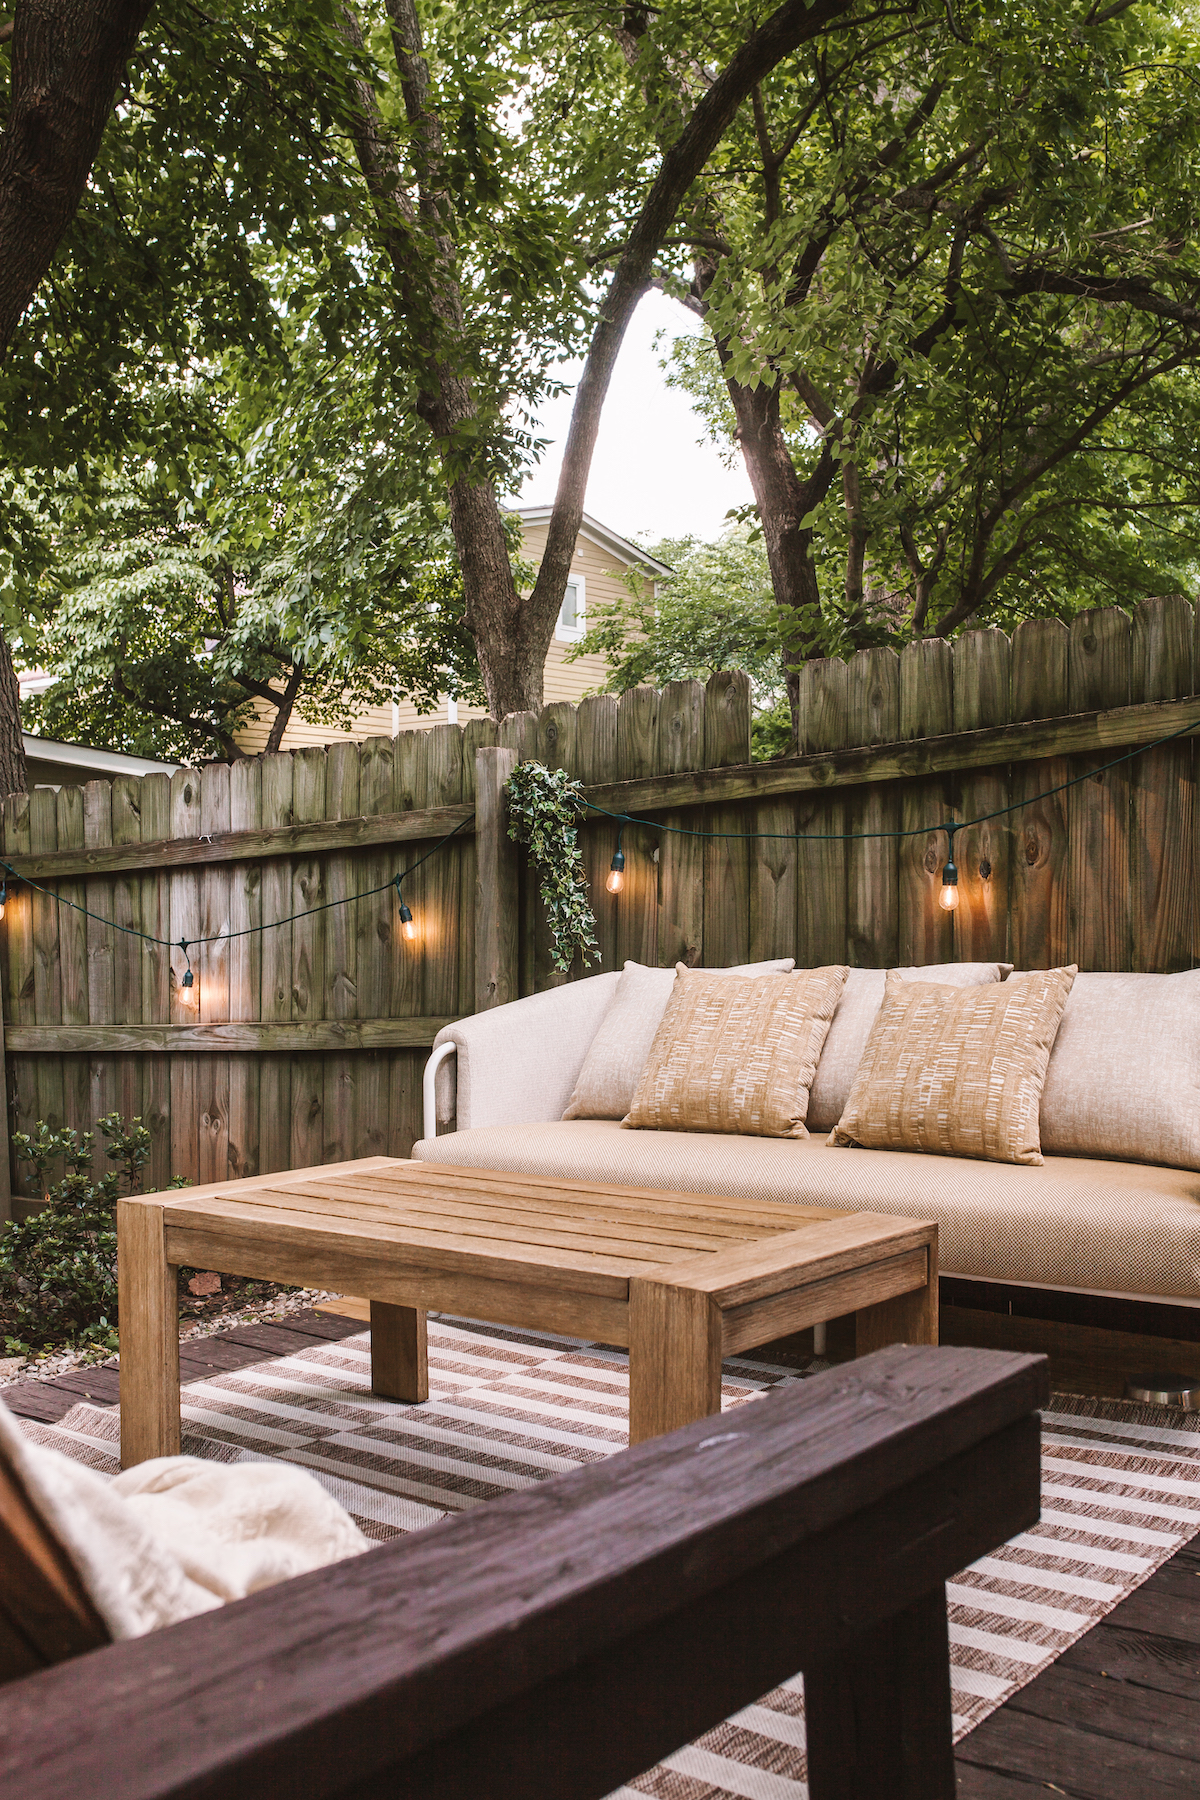 Creating an outdoor oasis in a small space | bygabriella.co